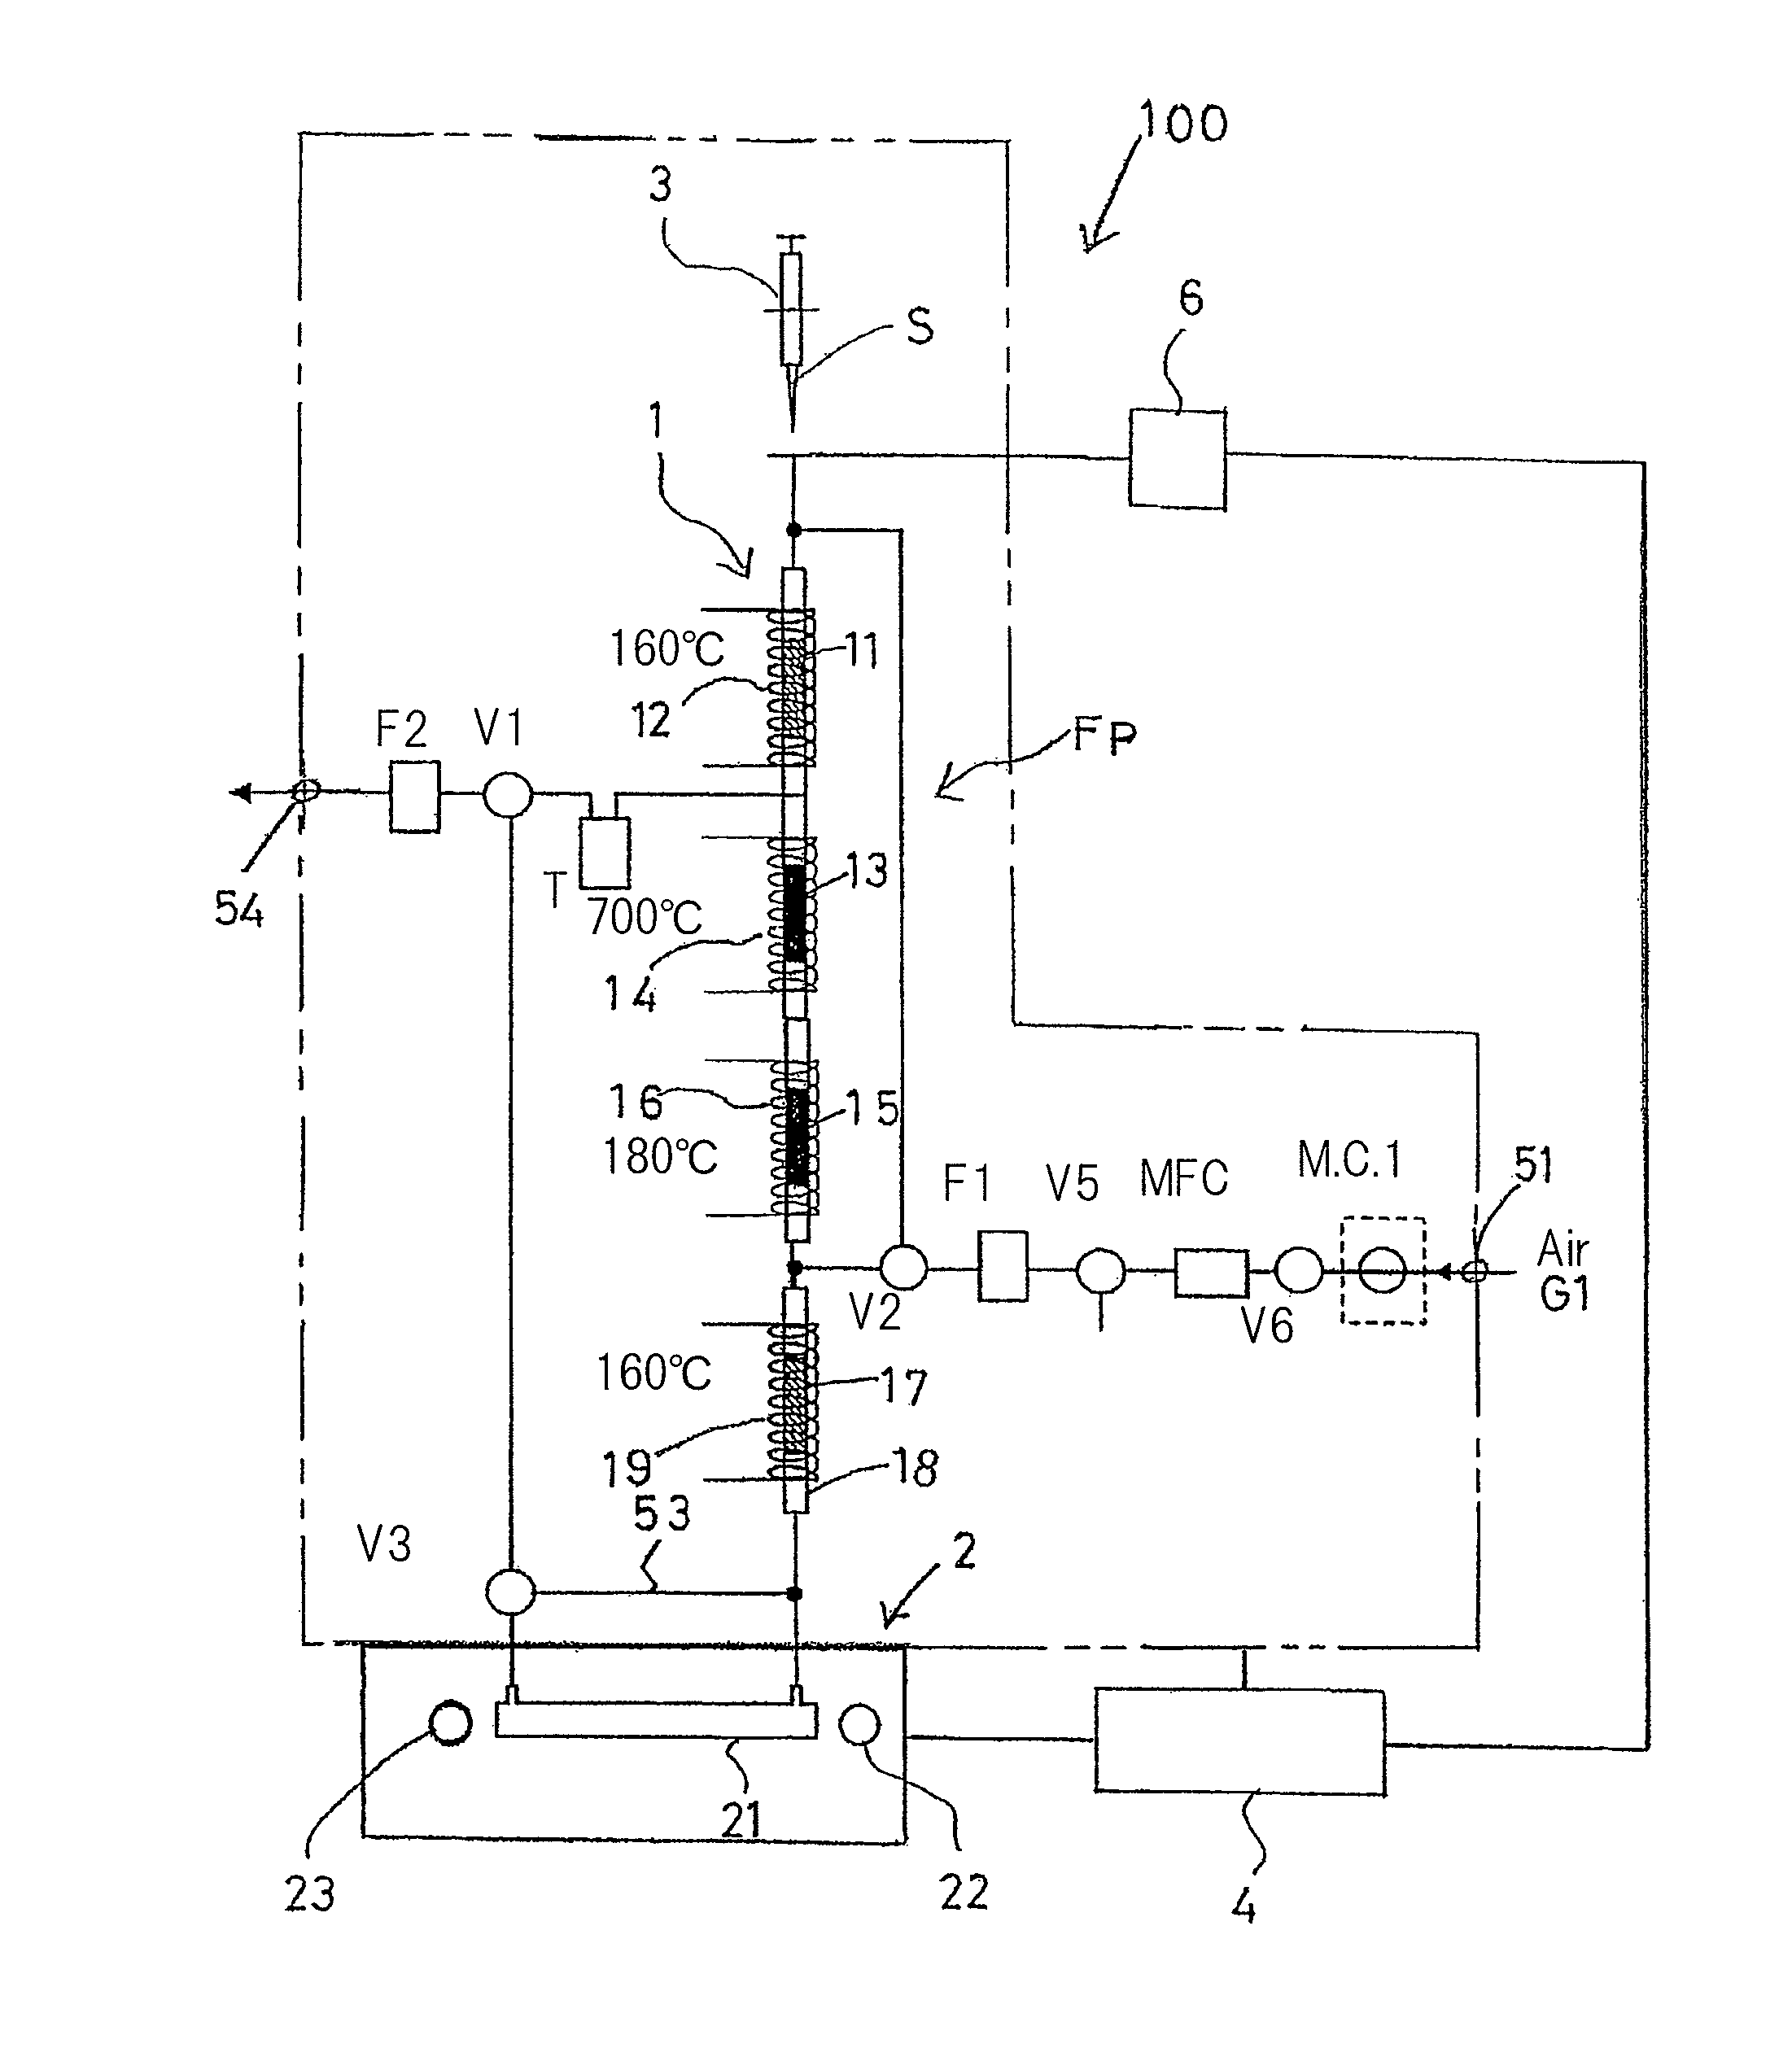 Mercury measuring apparatus for measuring mercury contained in sample composed mainly of hydrocarbon